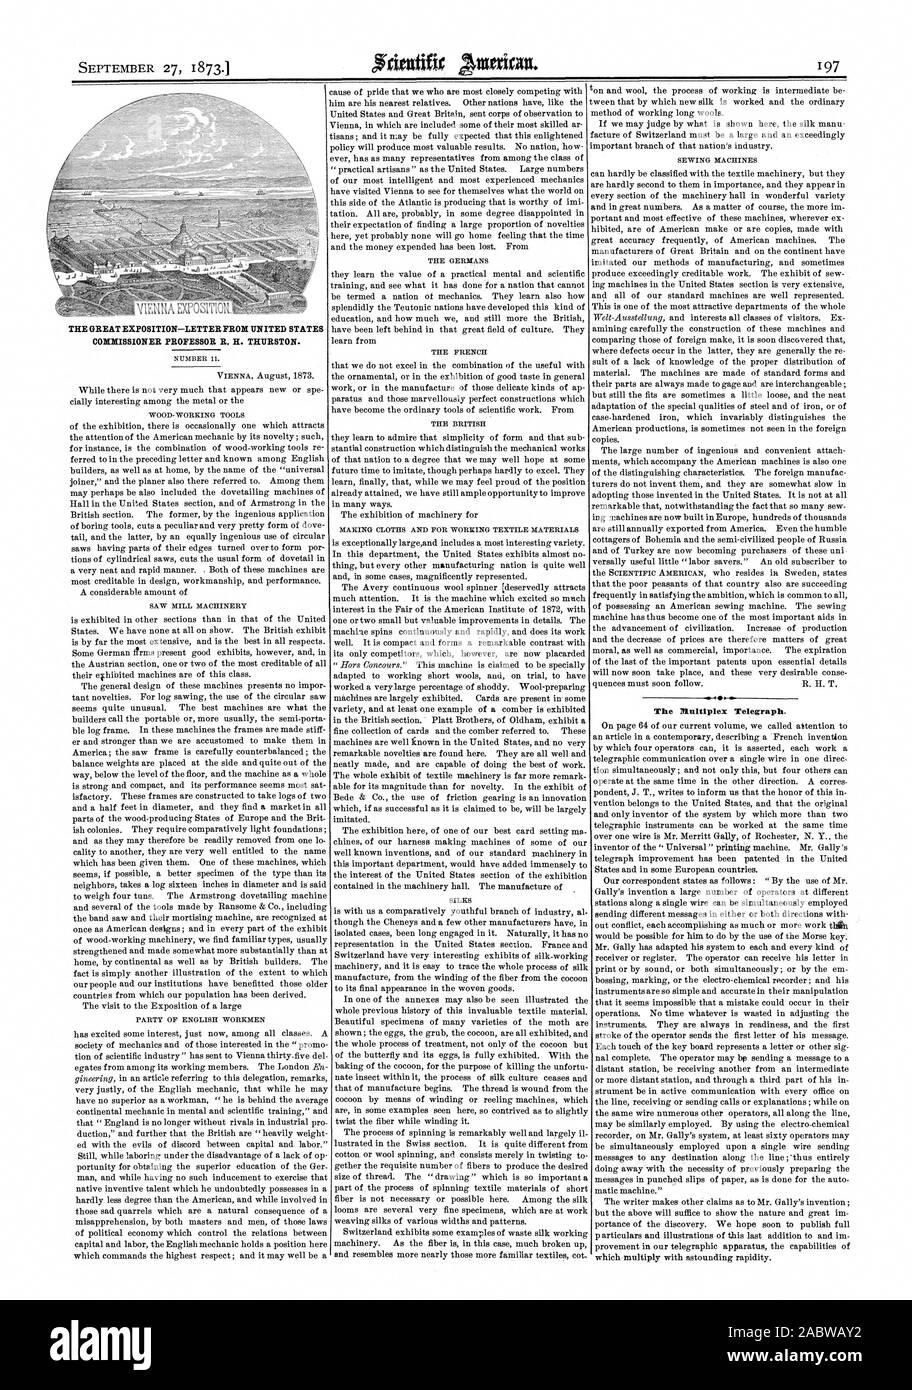 THE GREAT EXPOSITION—LETTER FROM UNITED STATES COMMISSIONER PROFESSOR R. H. THURSTON. The Multiplex Telegraph., scientific american, 1873-09-27 Stock Photo